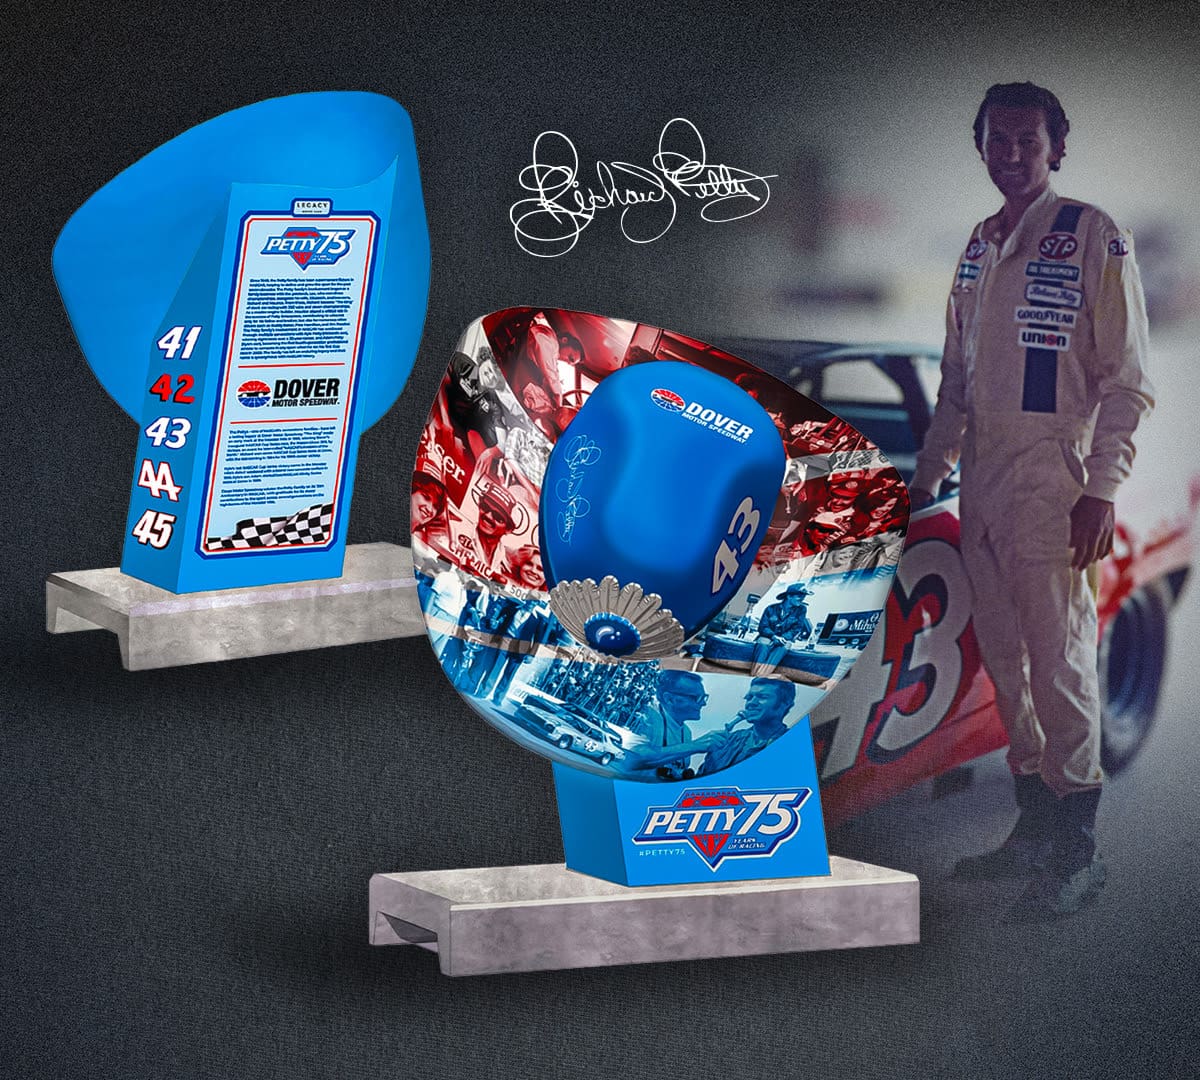 Featured image for “Dover Motor Speedway honors NASCAR legend Richard Petty”